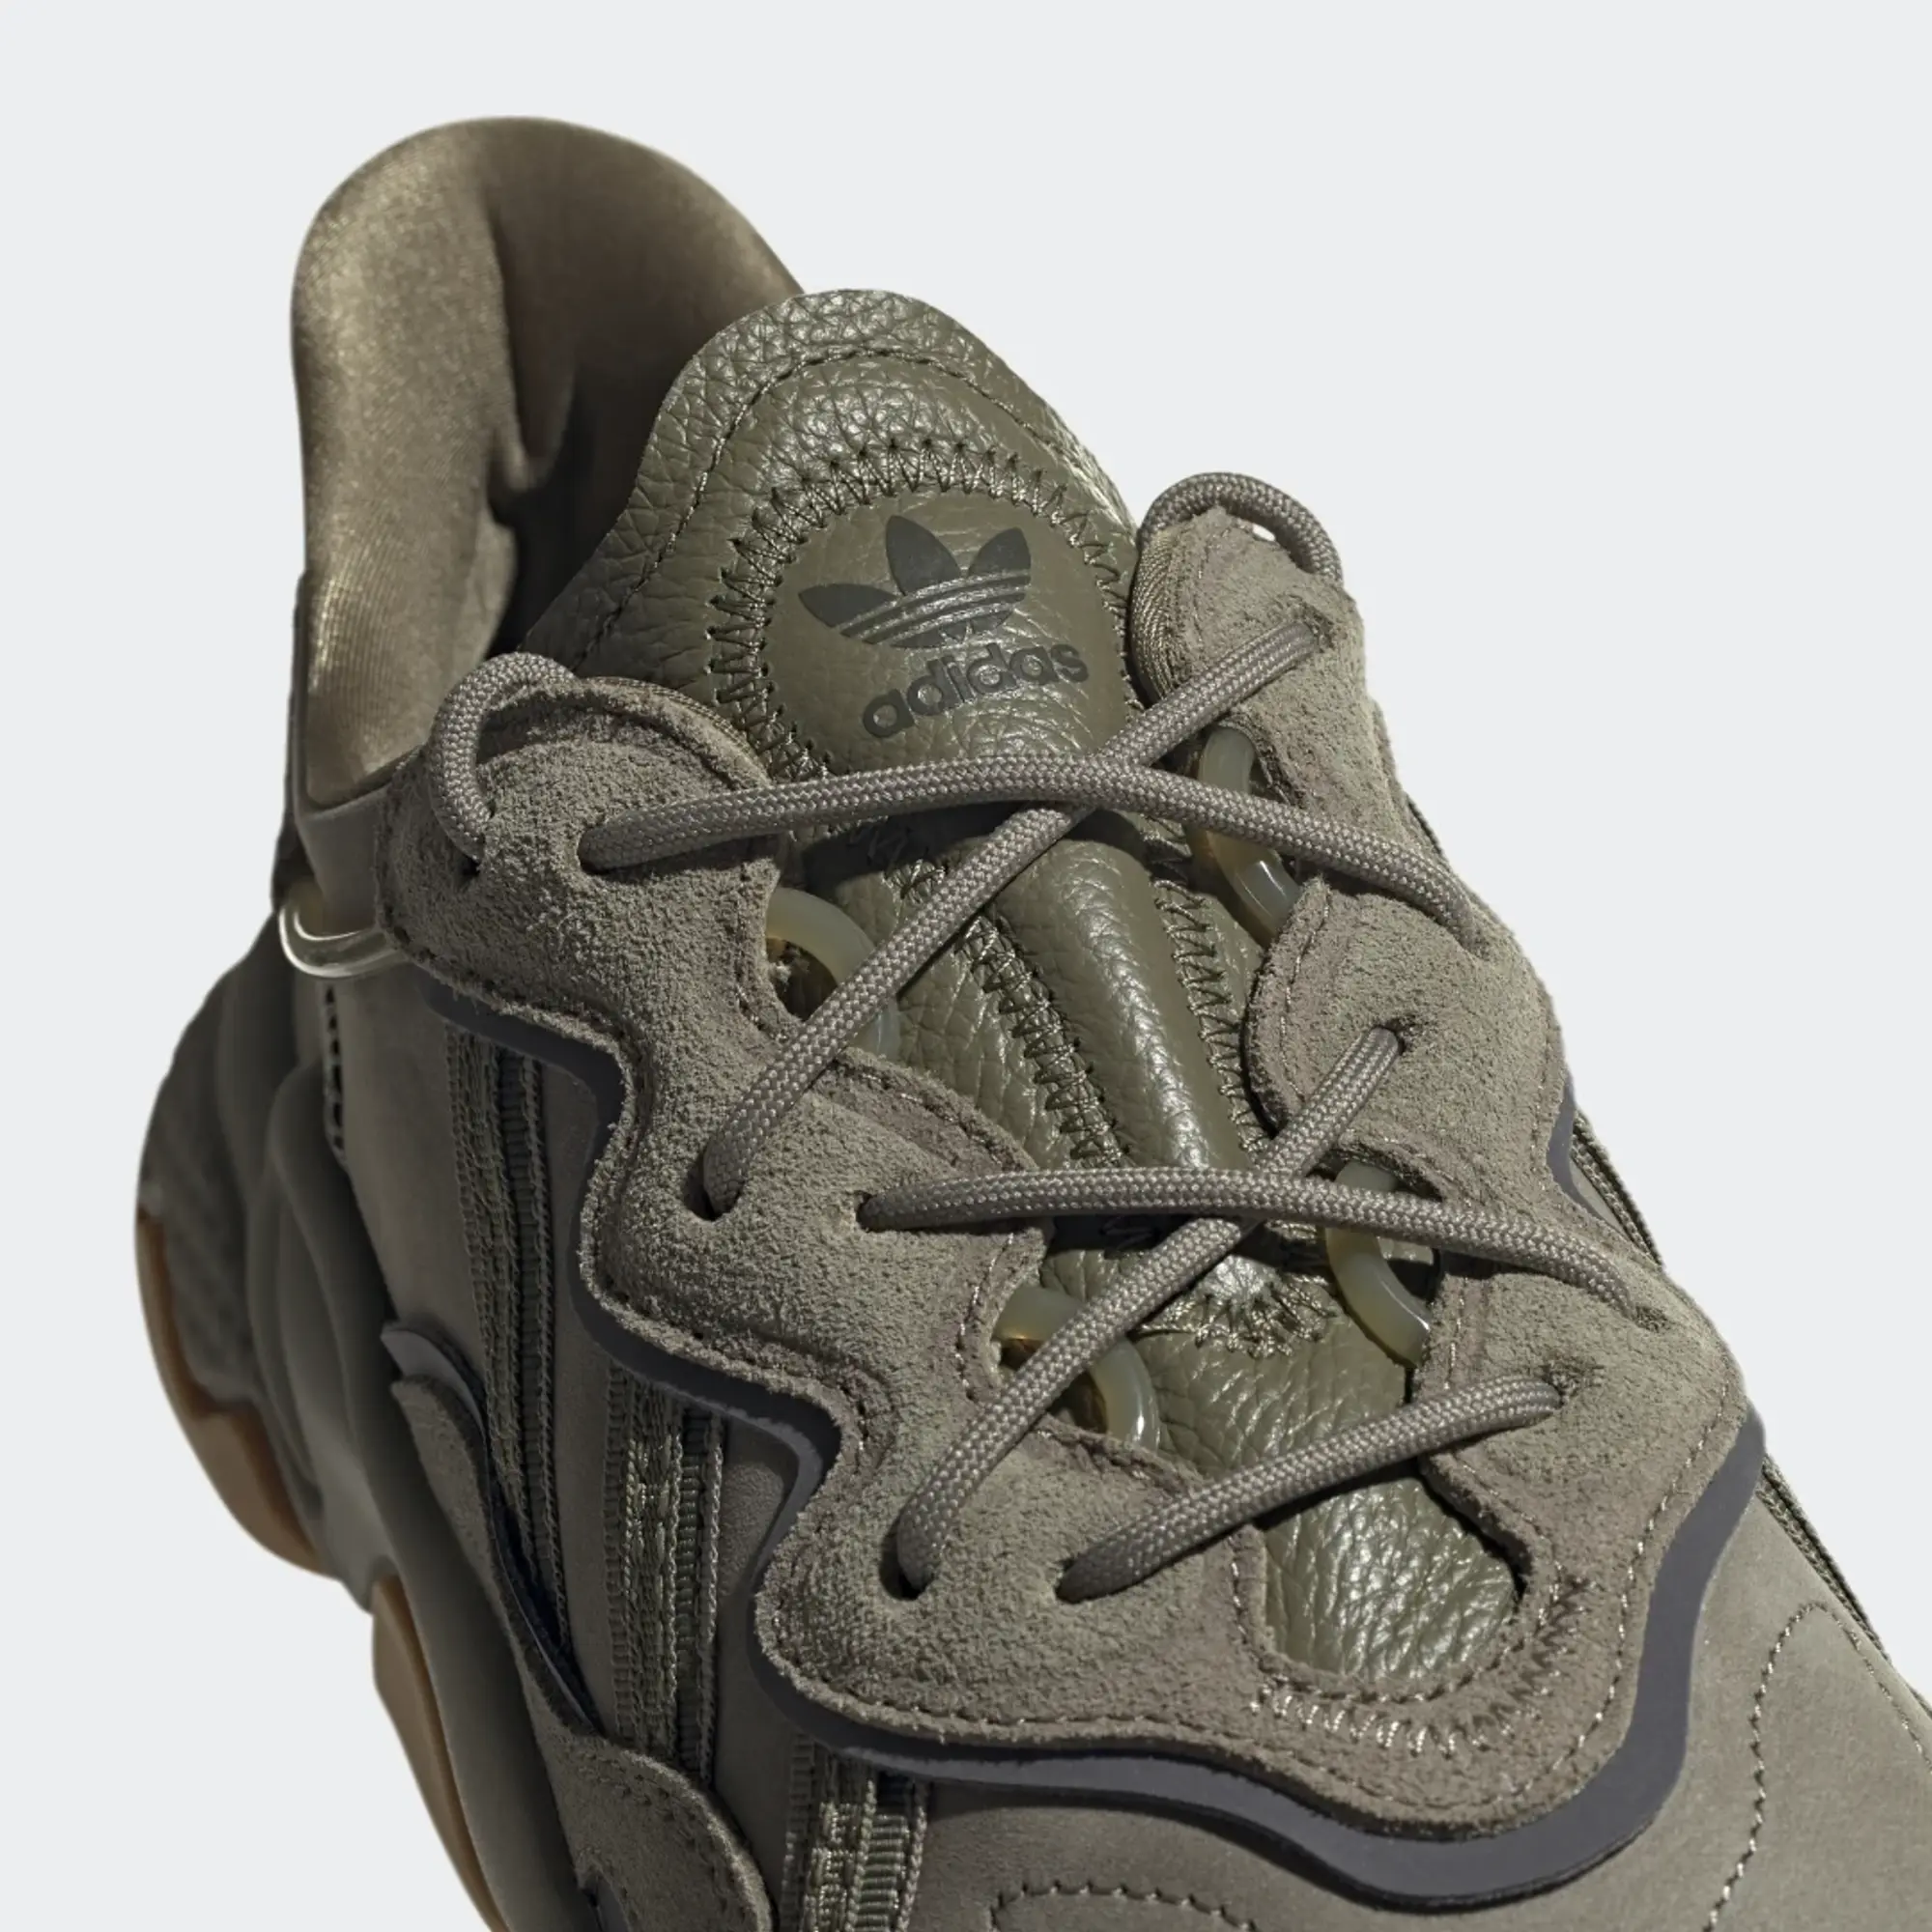 Adidas Originals Ozweego Trainers In Olive-Green